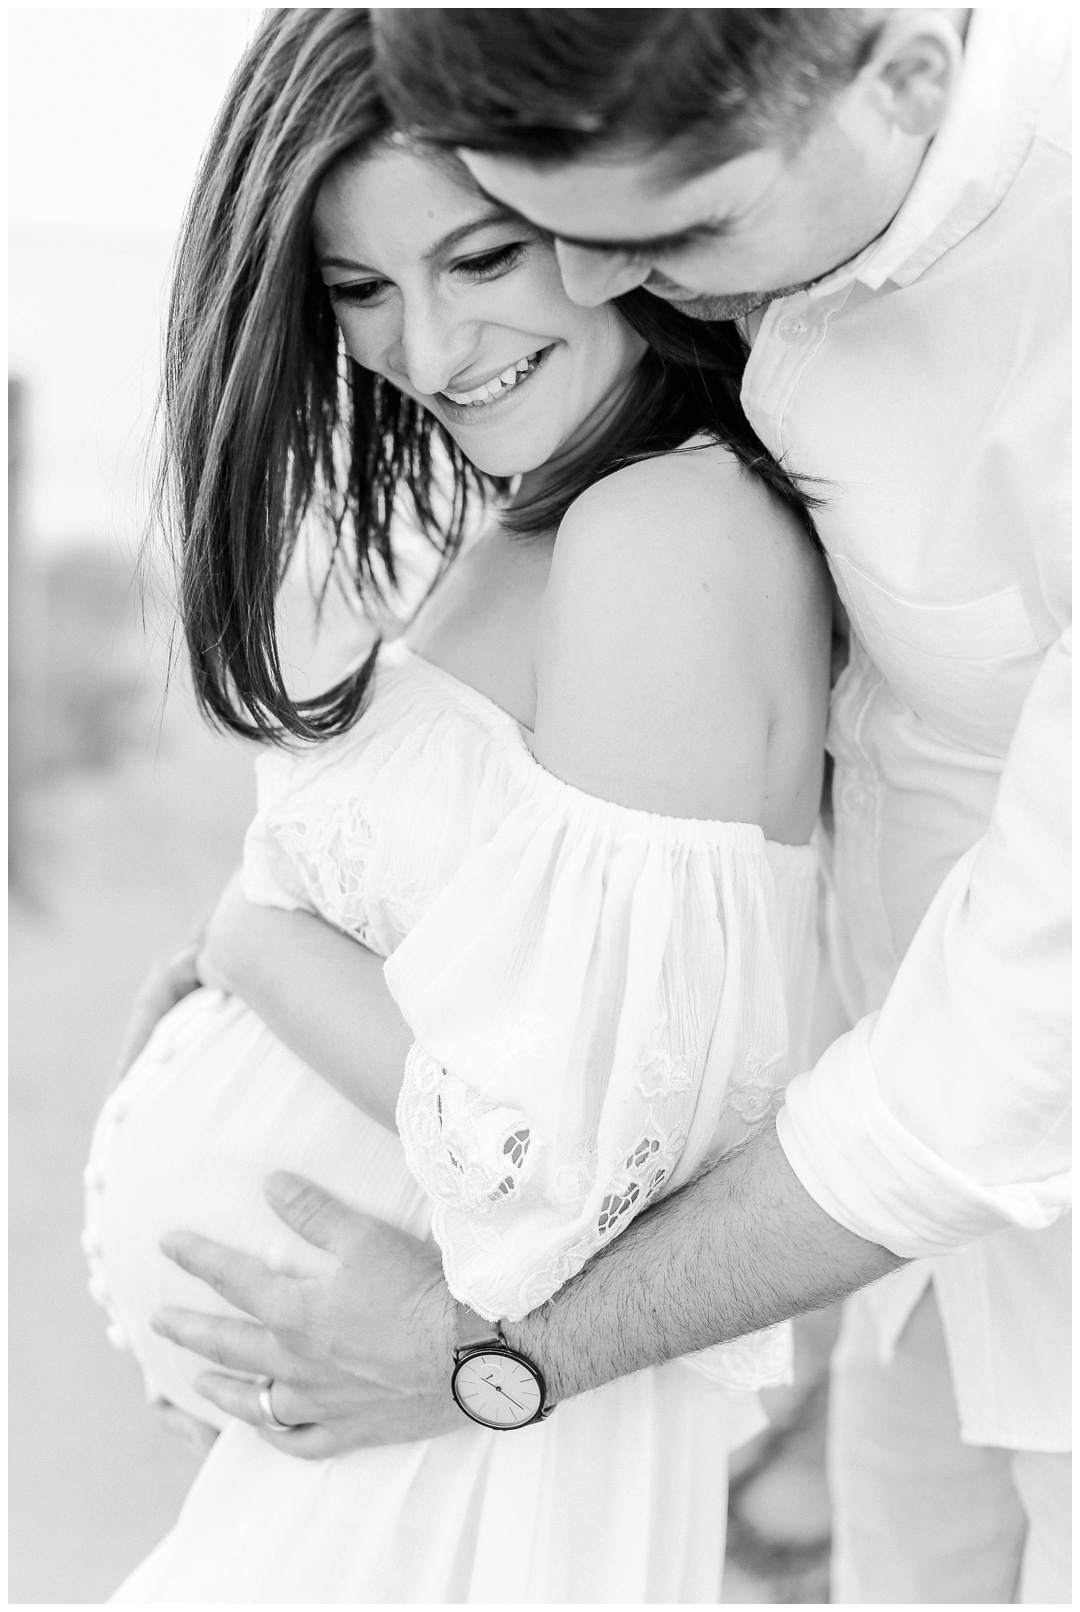 Crystal-Cove-State-Beach-Maternity-Session-Crystal-Cove-Newport-Beach-Maternity-Photographer-Crystal-Cove-Session-Cori-Kleckner-Photography-Orange-County-Maternity-Family-Photos-Session-_0899.jpg